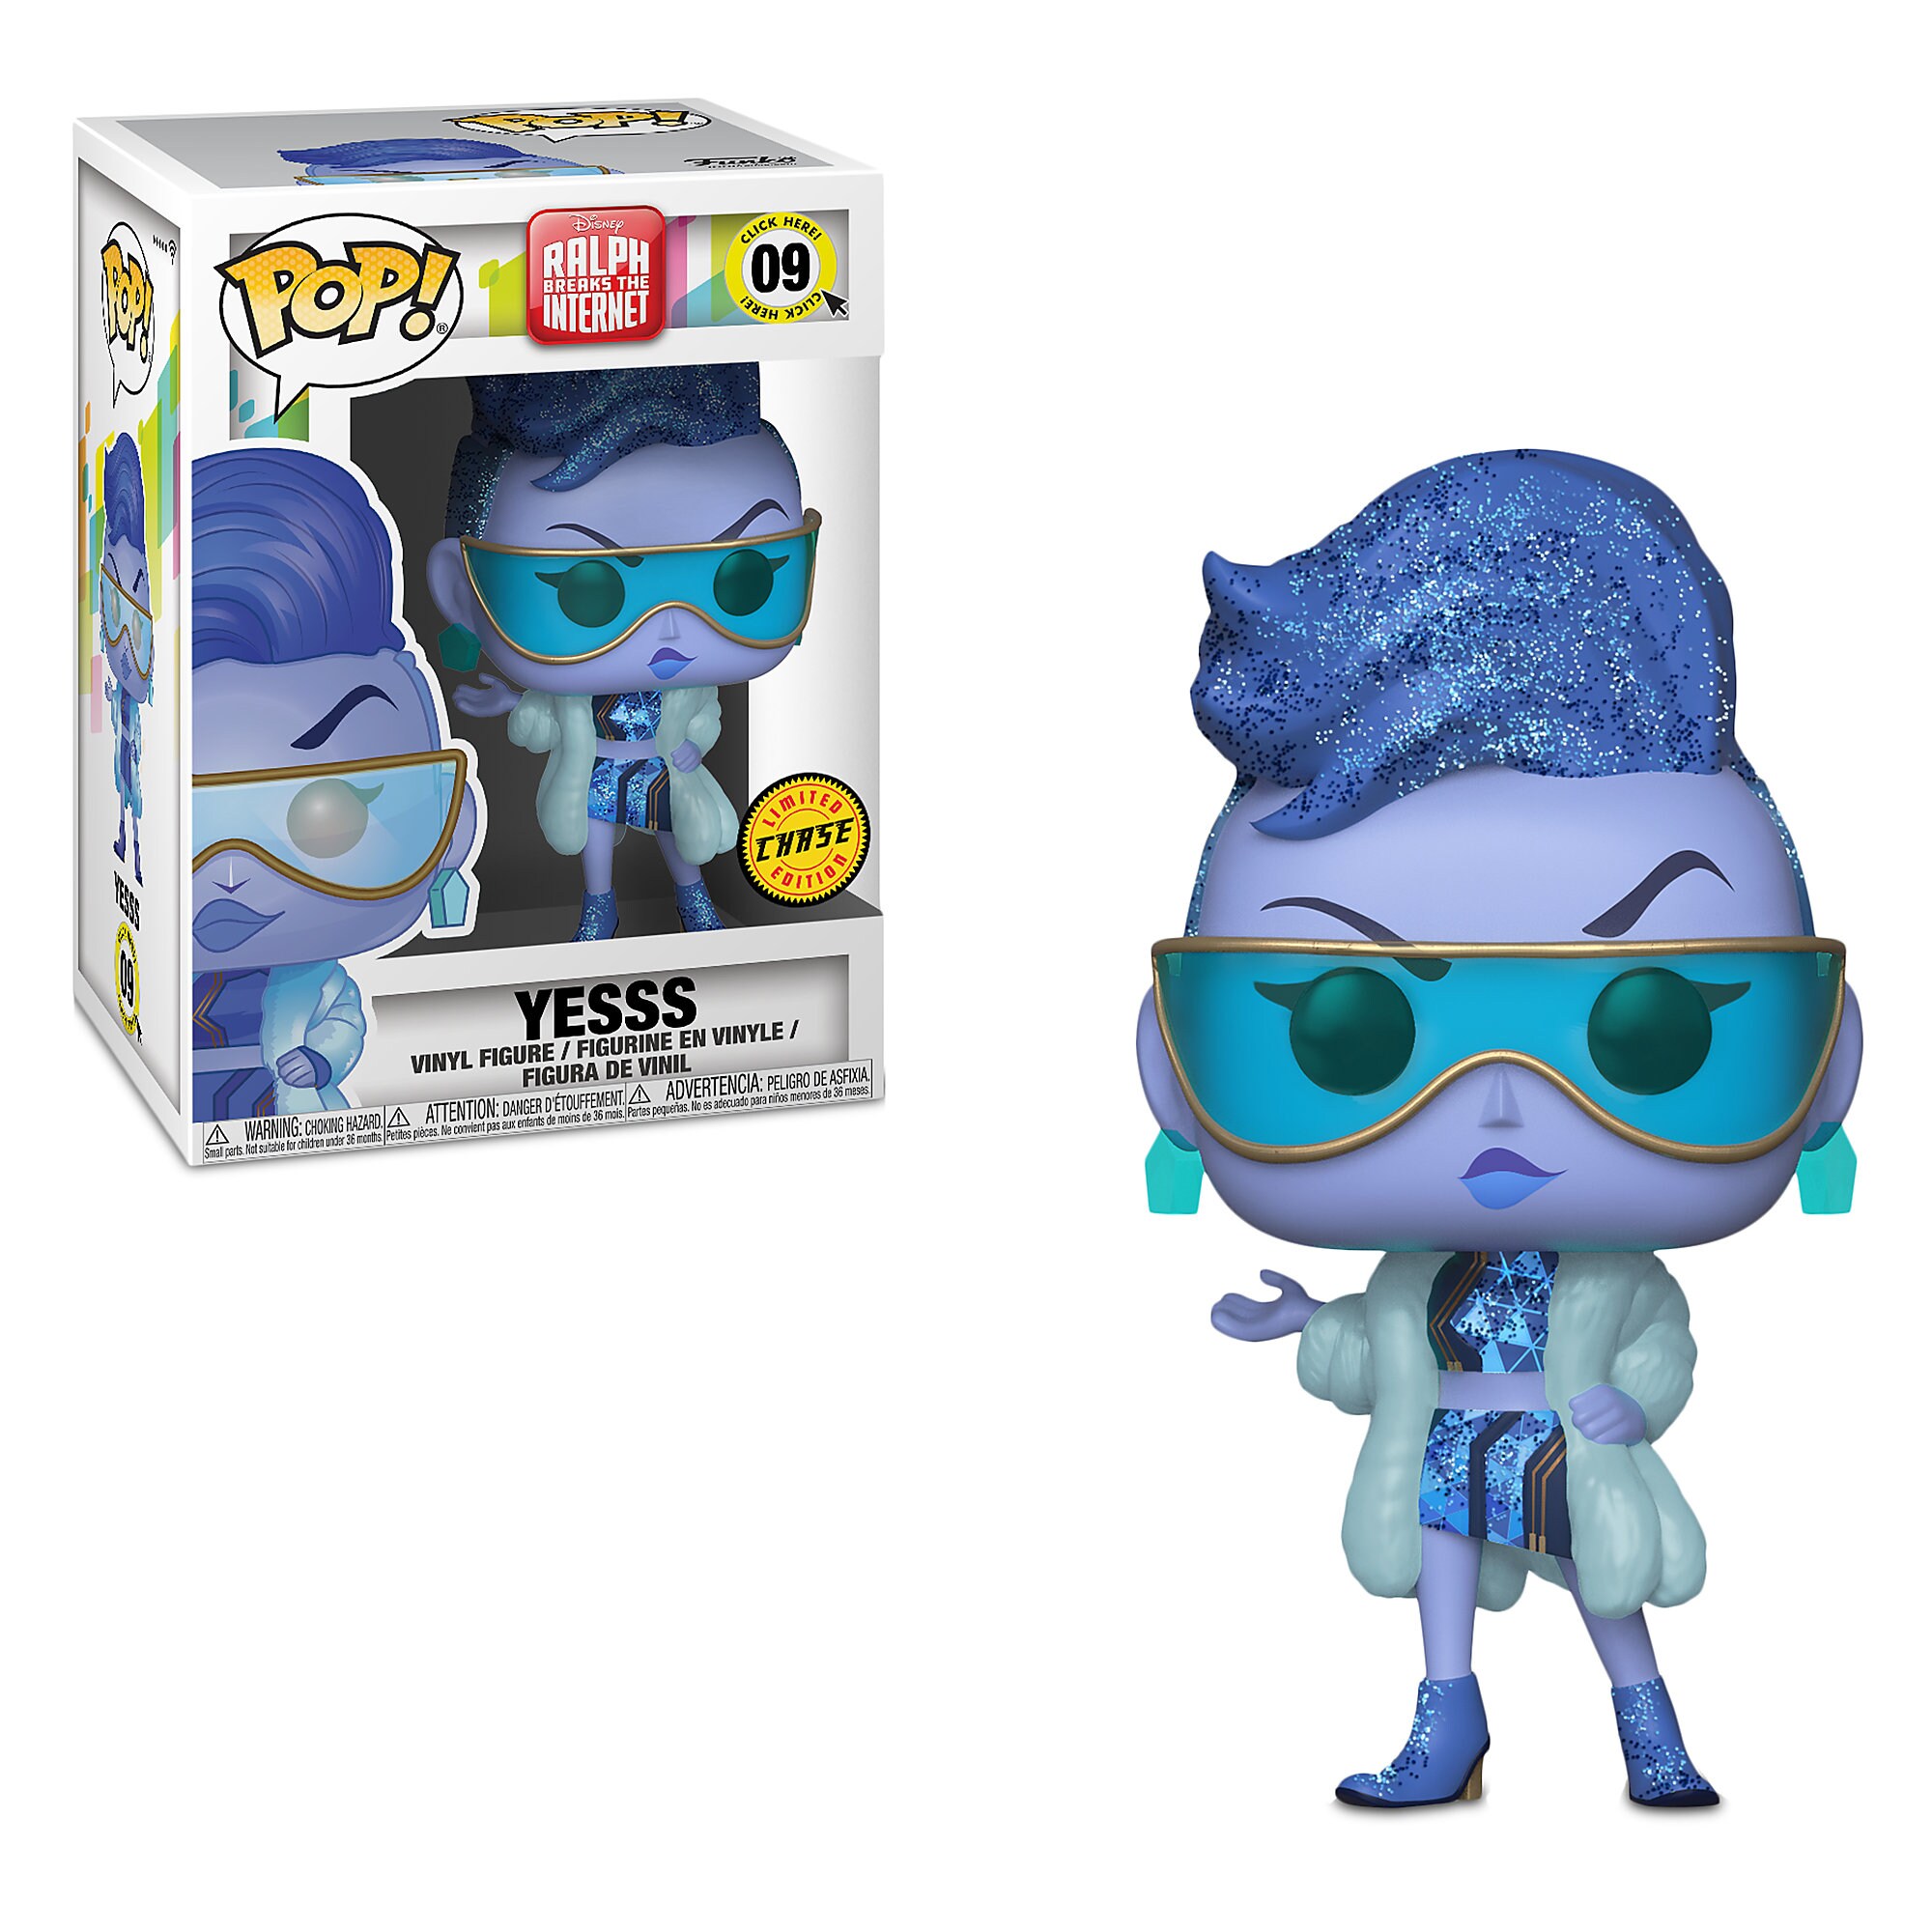 Yesss Pop! Vinyl Figure by Funko - Ralph Breaks the Internet - Limited Chase Edition